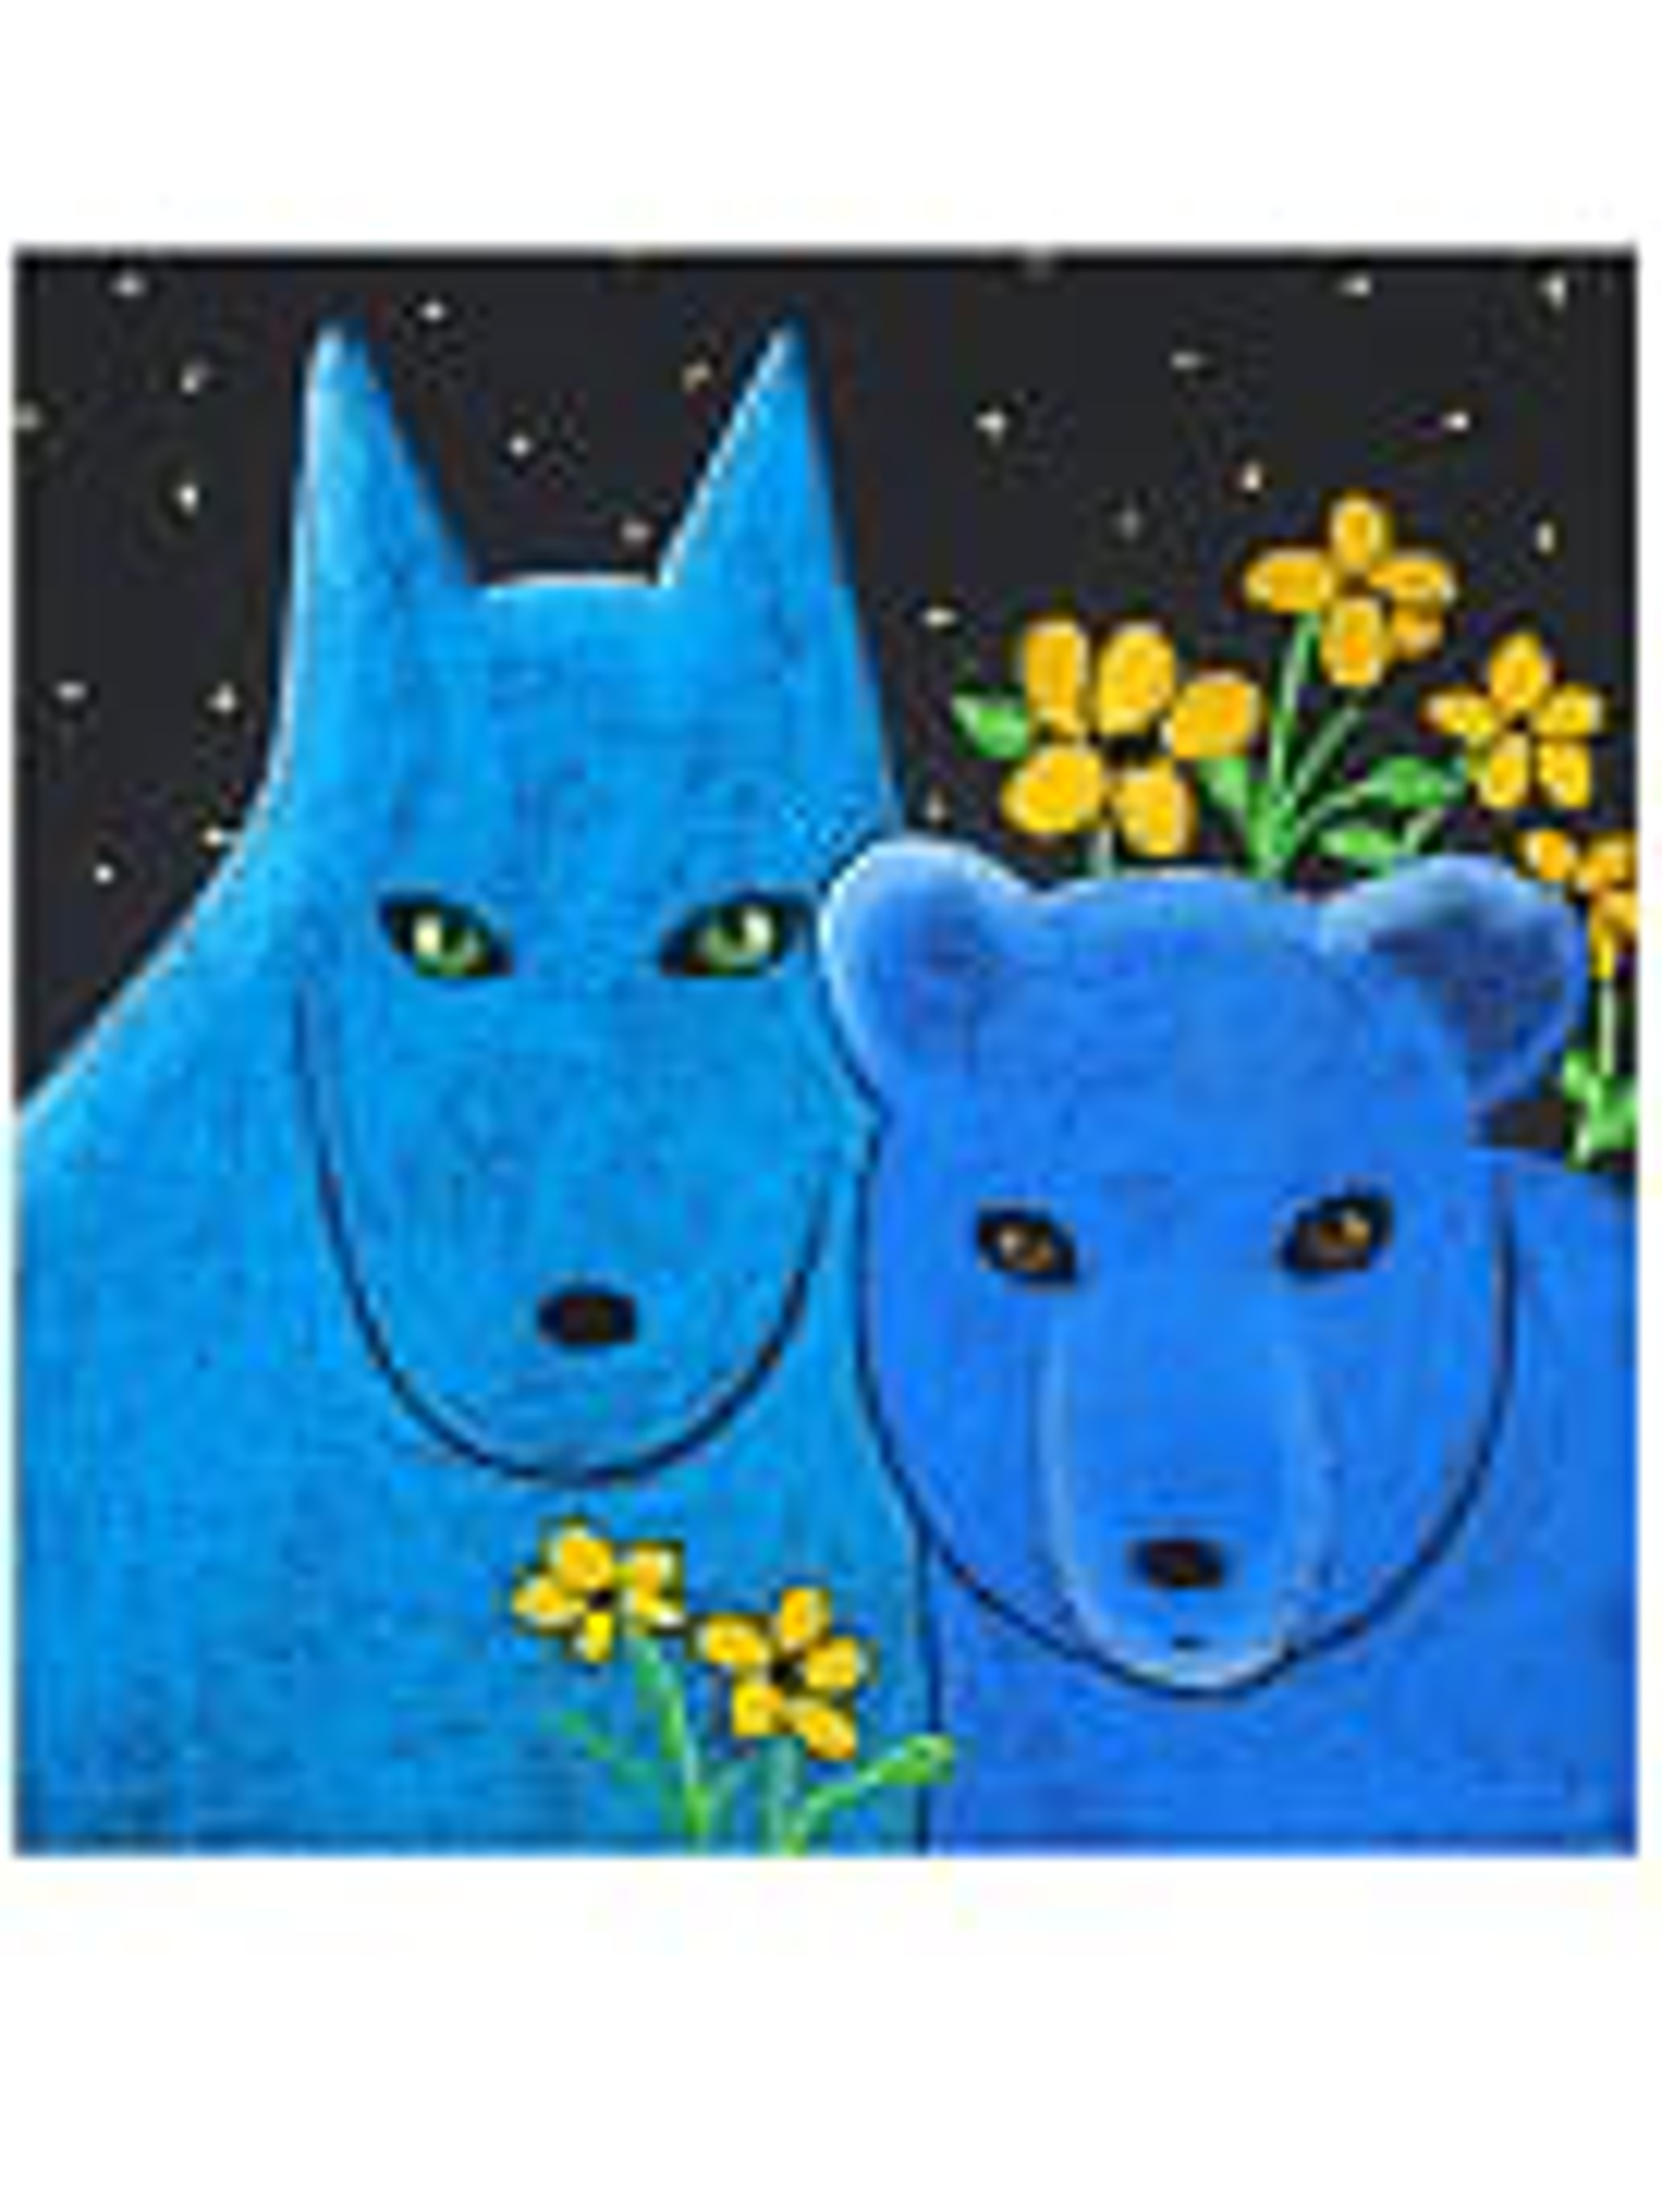 From: The Night Garden 'Partners' by Carole LaRoche